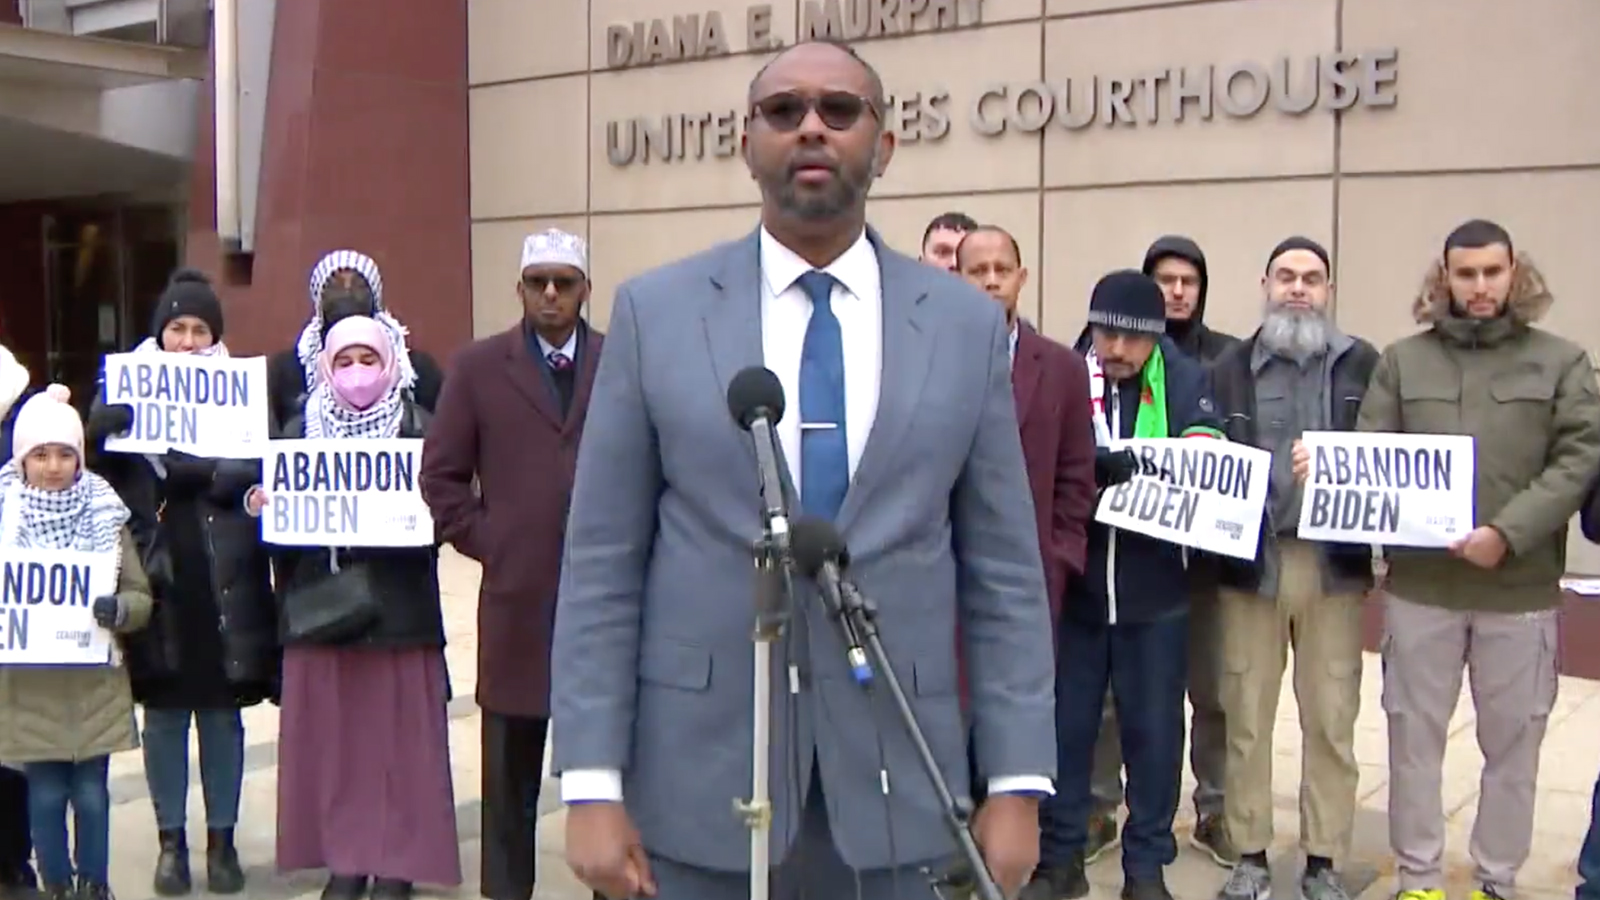 Jaylani Hussein speaks during a news conference about the Muslim community abandoning President Biden's 2024 election efforts. (Video screen grab/CBS)